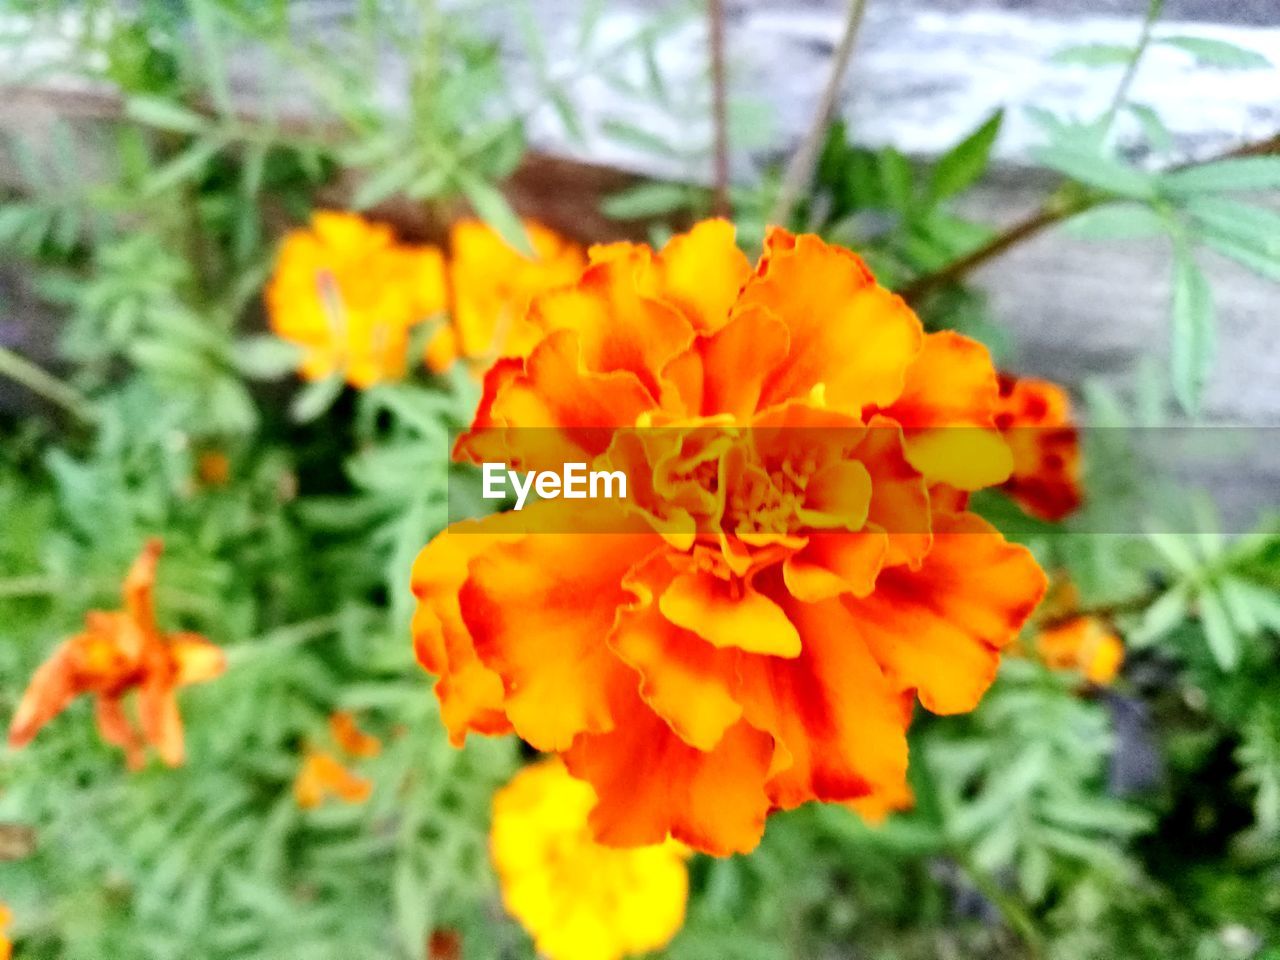 CLOSE-UP OF MARIGOLD FLOWERS BLOOMING OUTDOORS